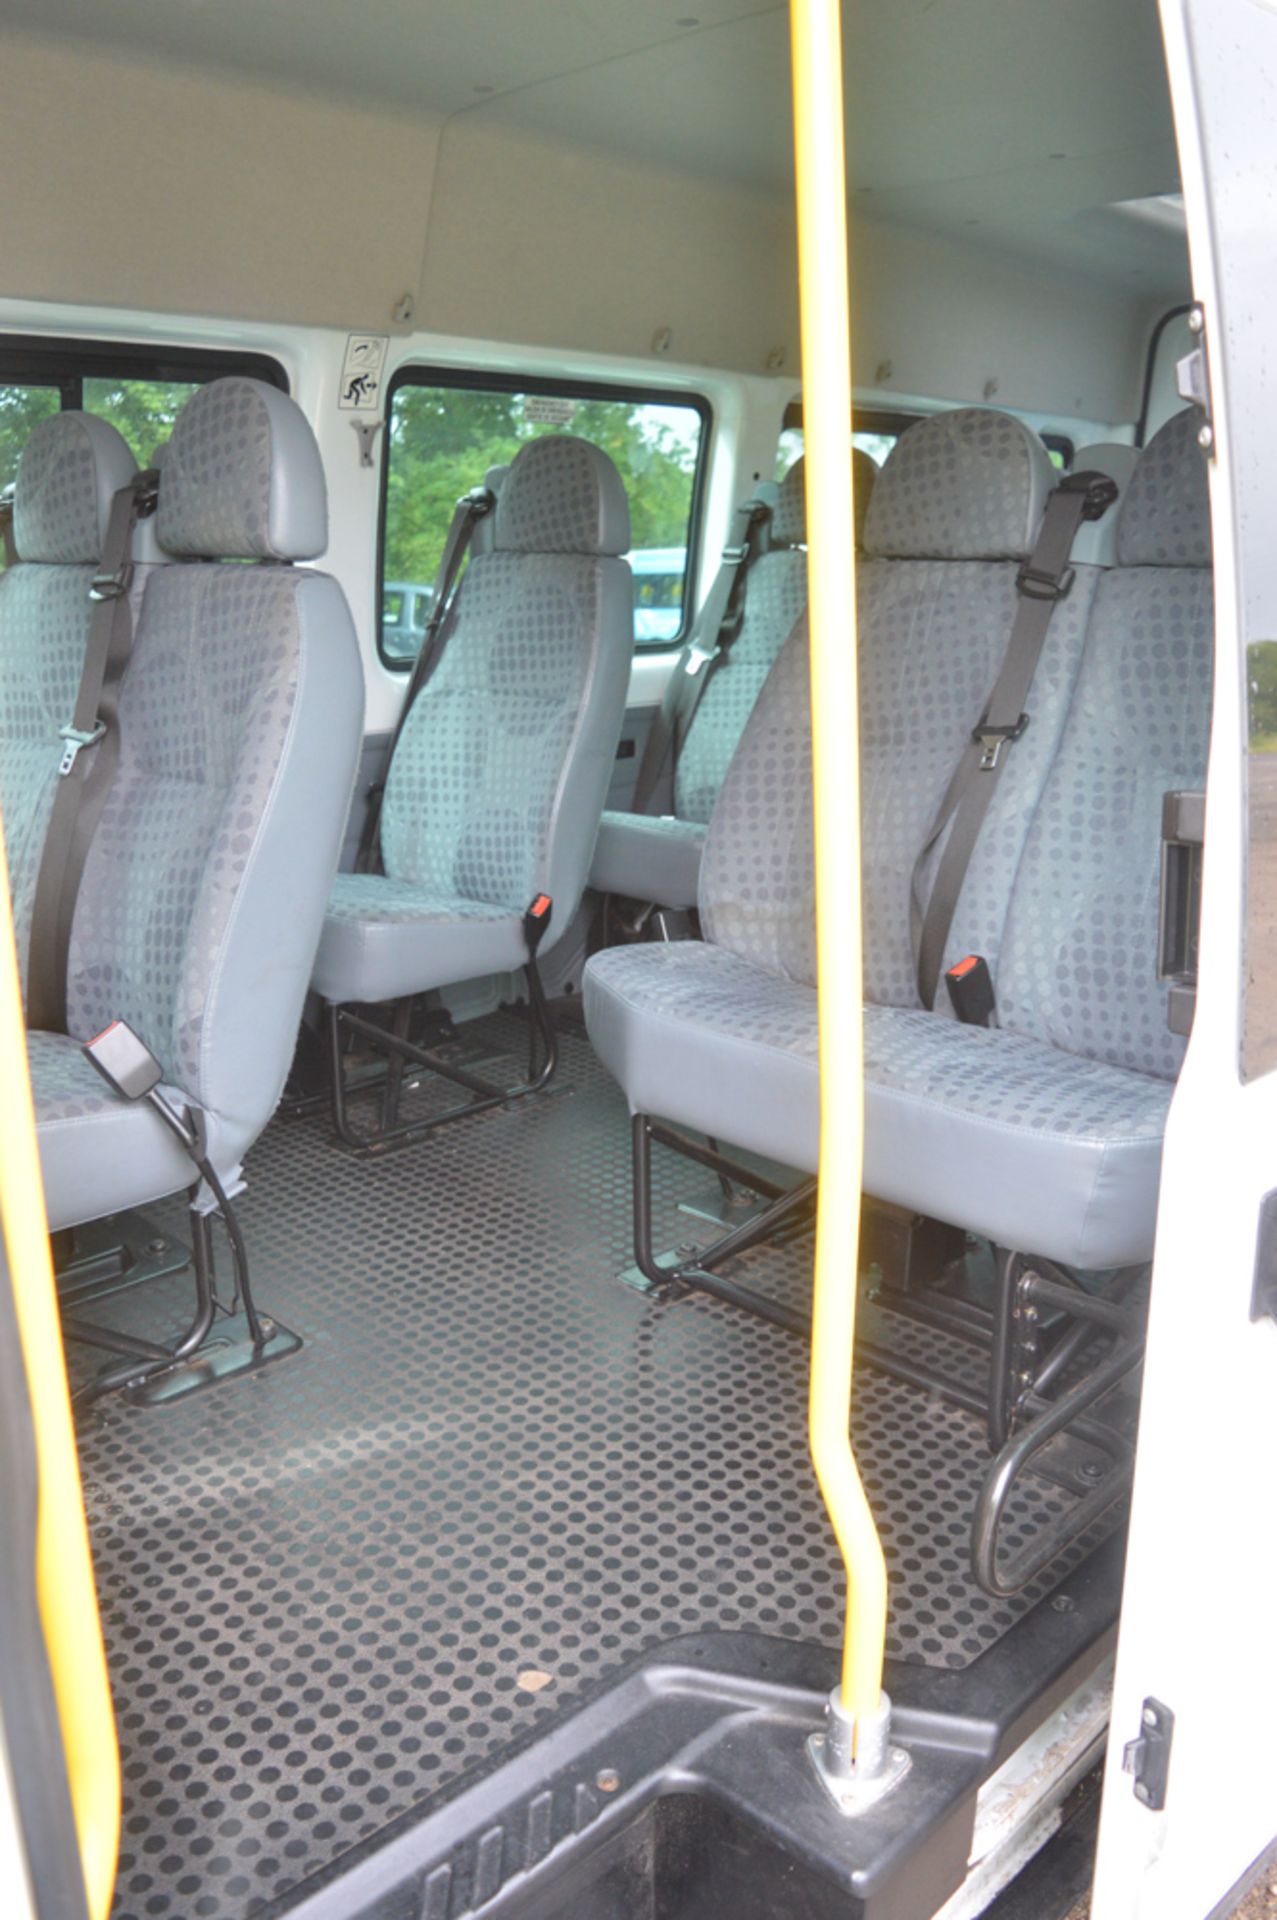 Ford Transit 135 T430 RWD 9 seat minibus Registration Number: GY61 VZA Date of Registration: 30/ - Image 9 of 12